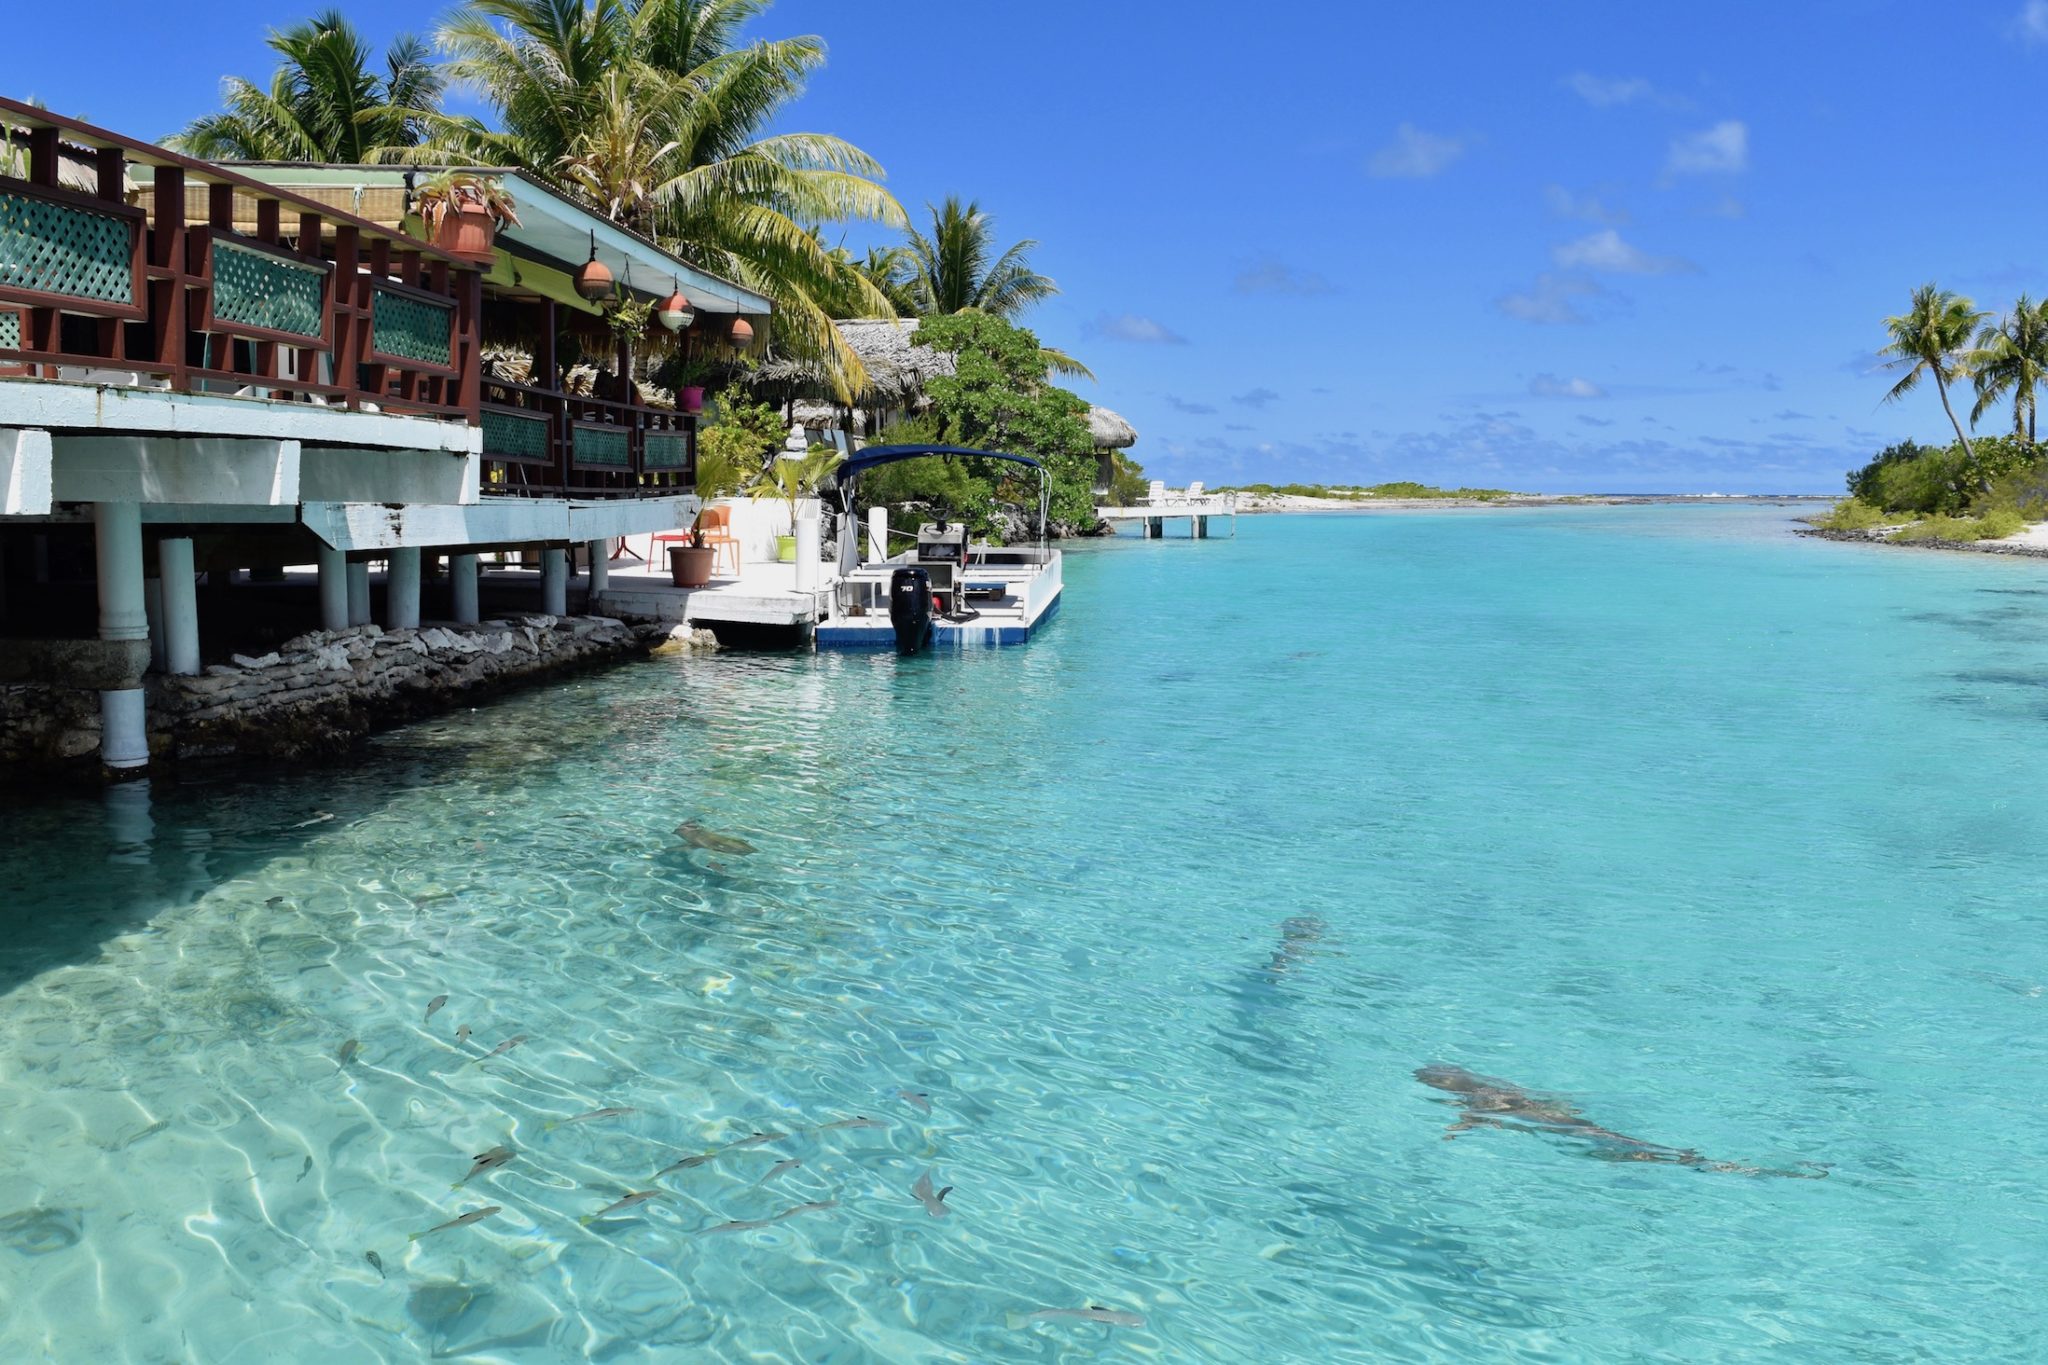 Fish and sharks swim in the shallows on Tikehau